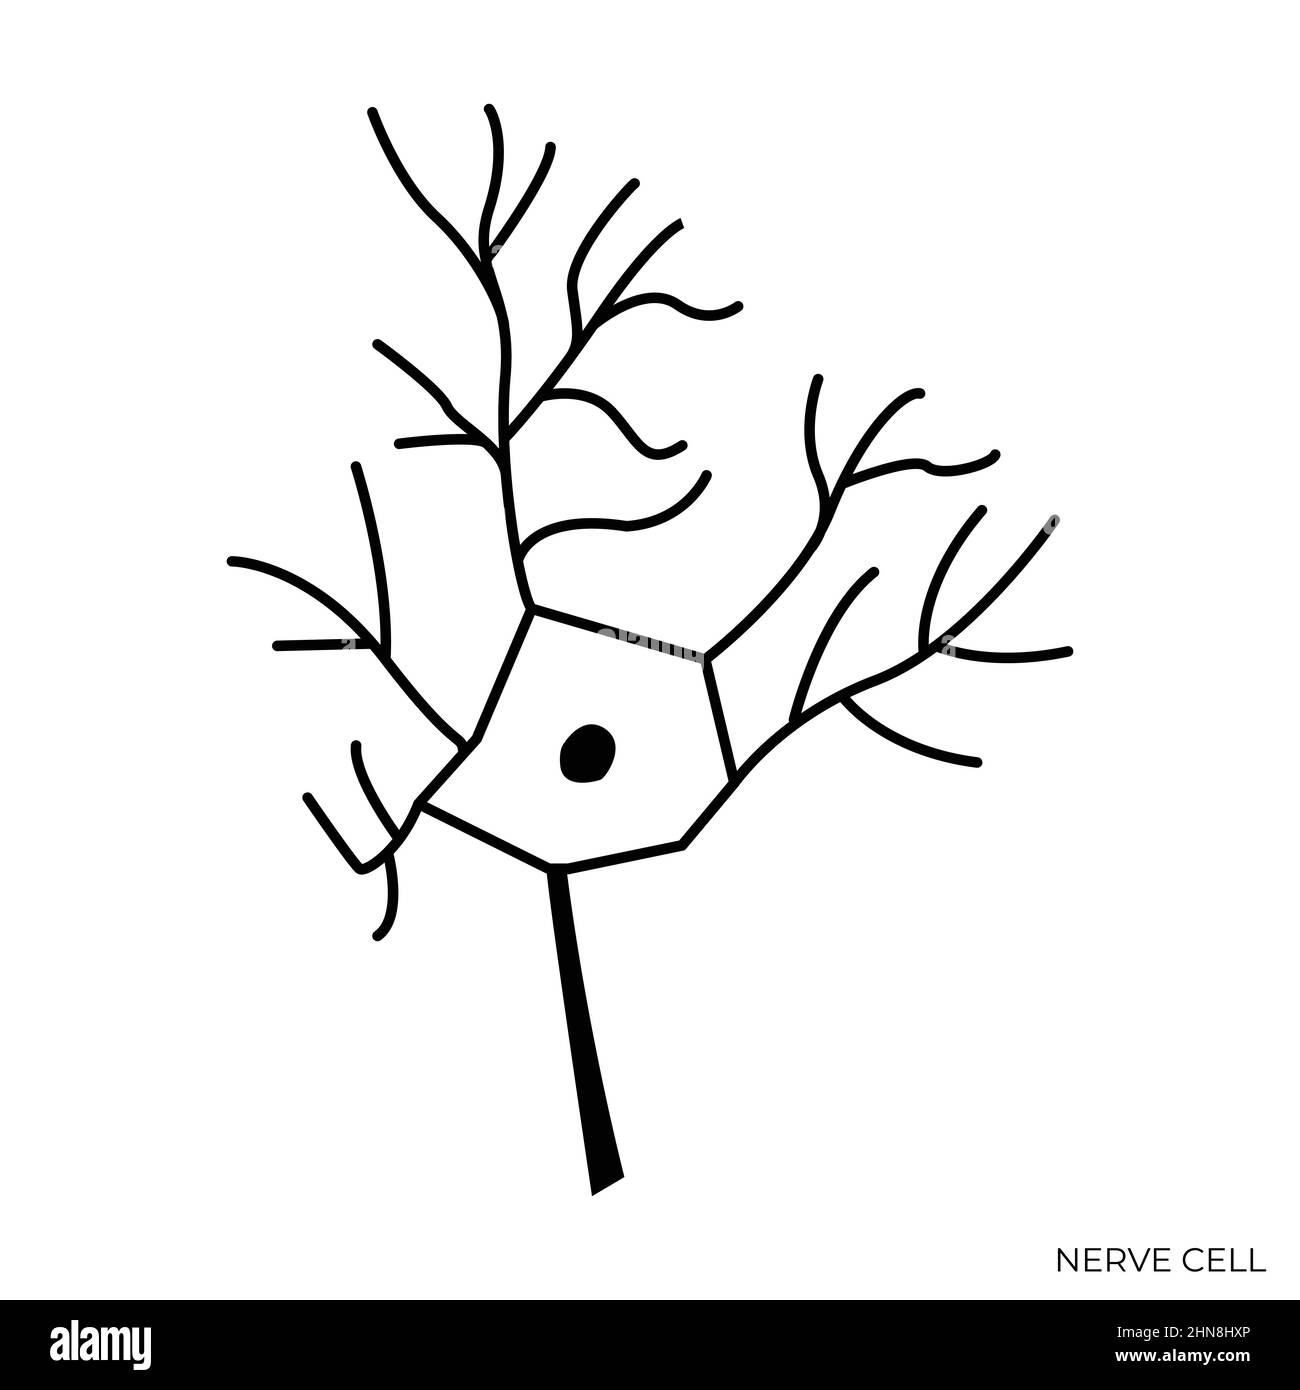 Nerve Cell Black and White Isolated Illustration Stock Vector